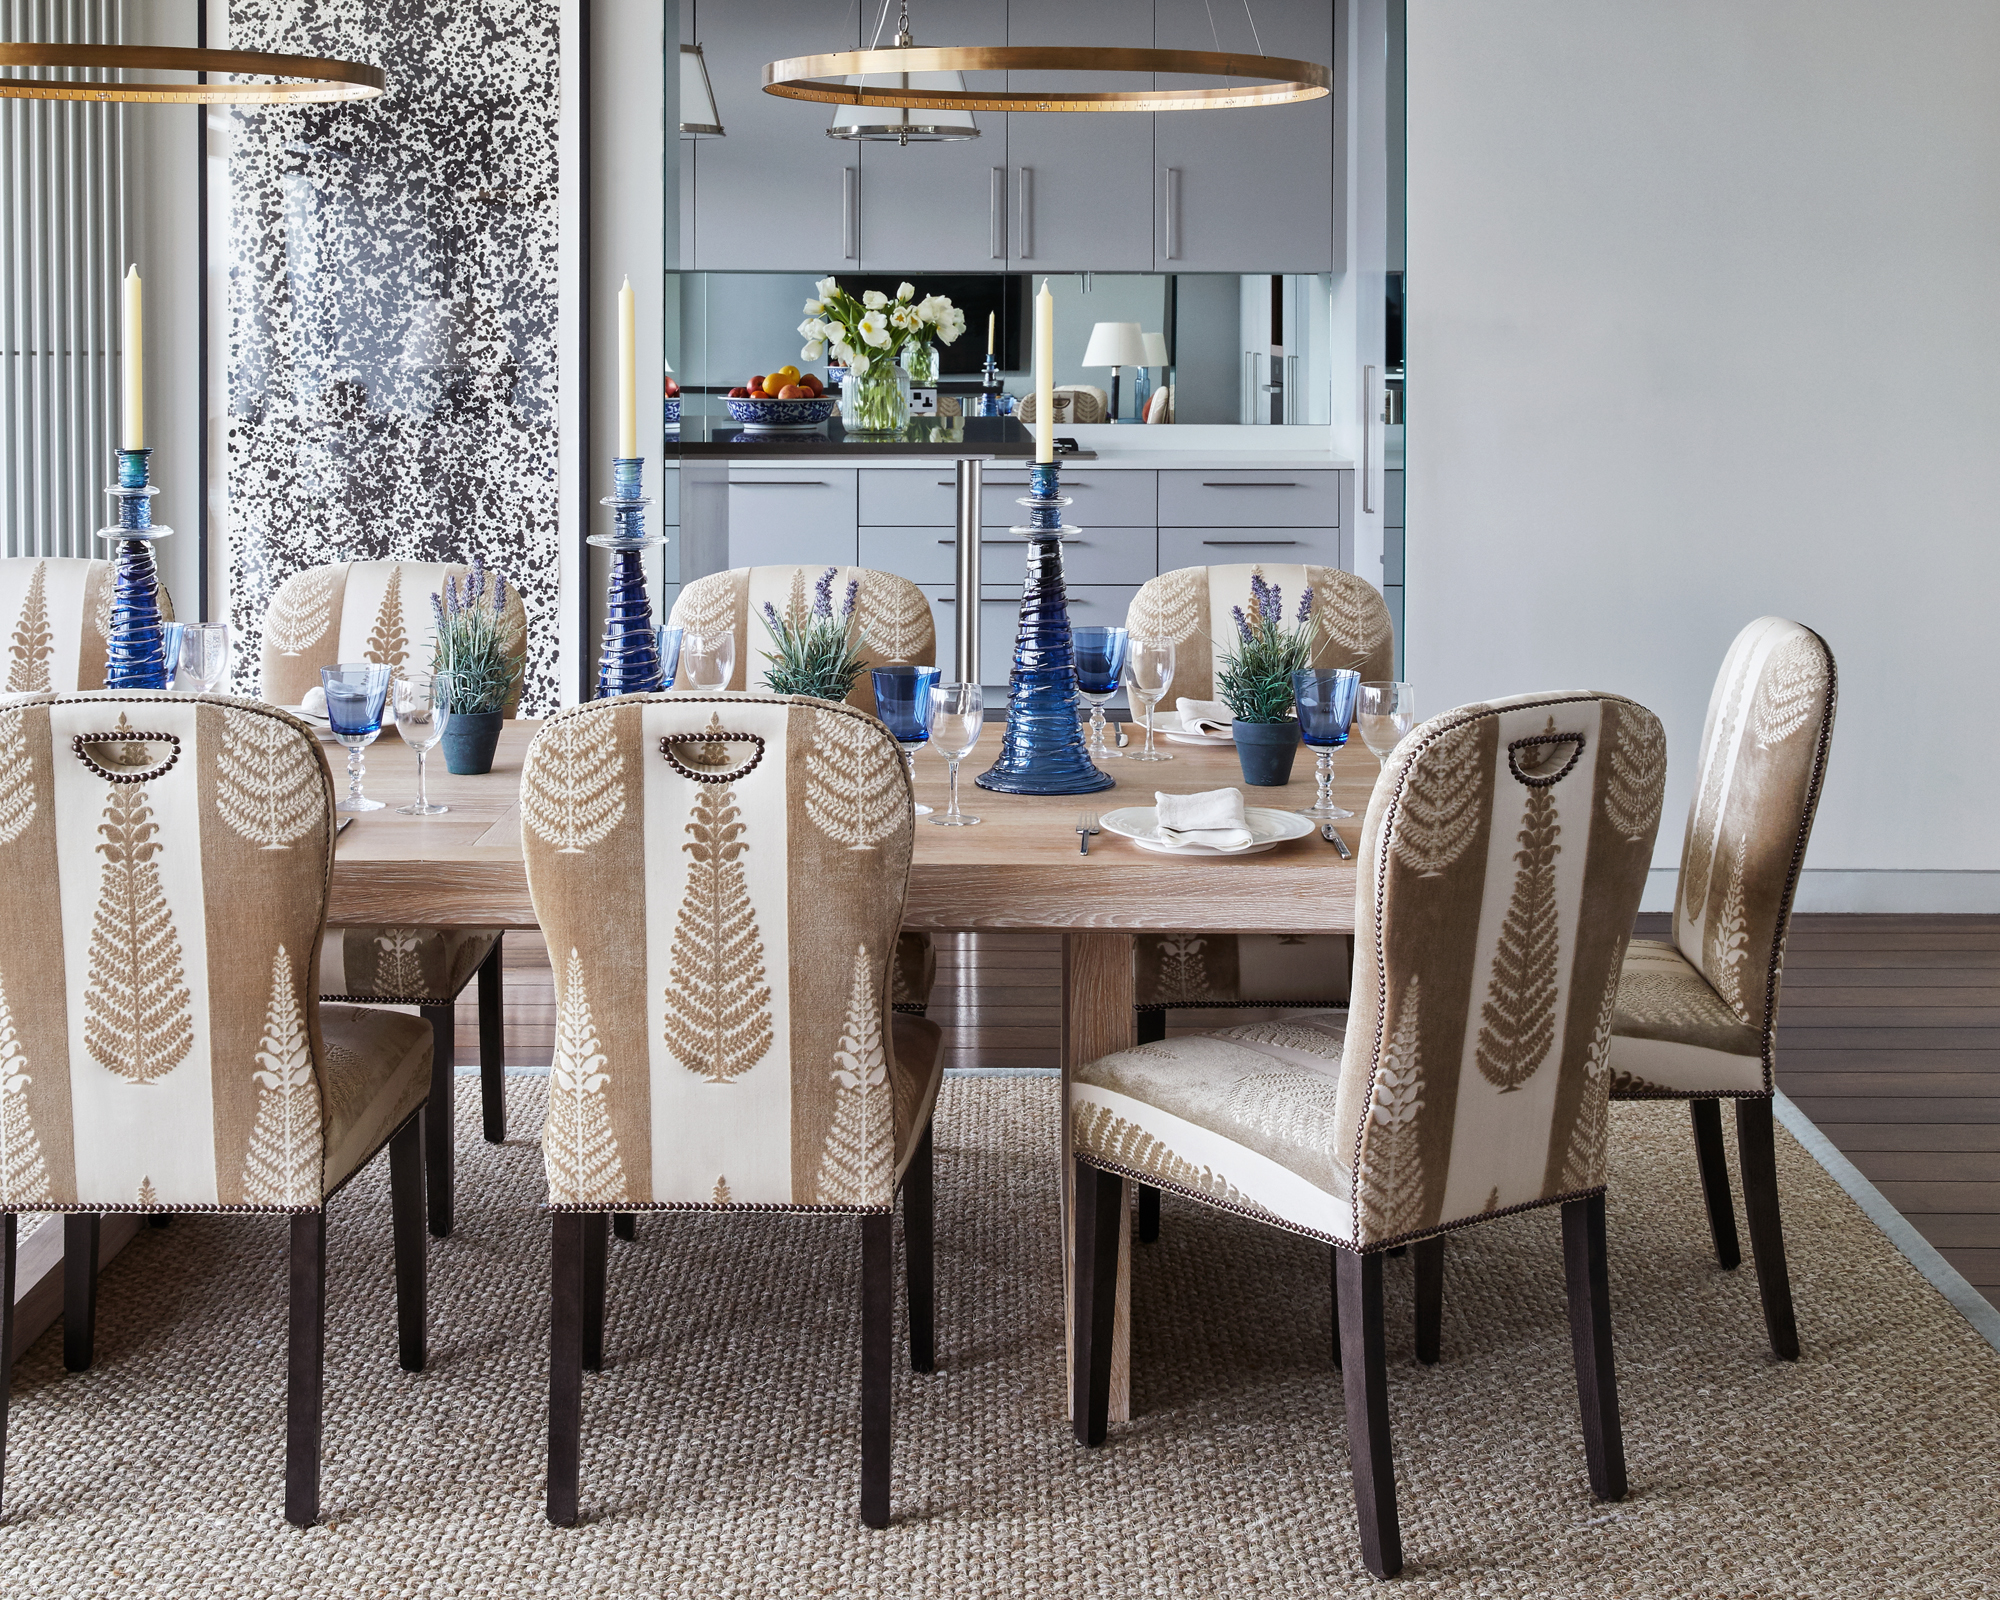 A dining table decor idea with neutral scheme, hanging ring pendant lights in brass and blue glass candlesticks and glasses